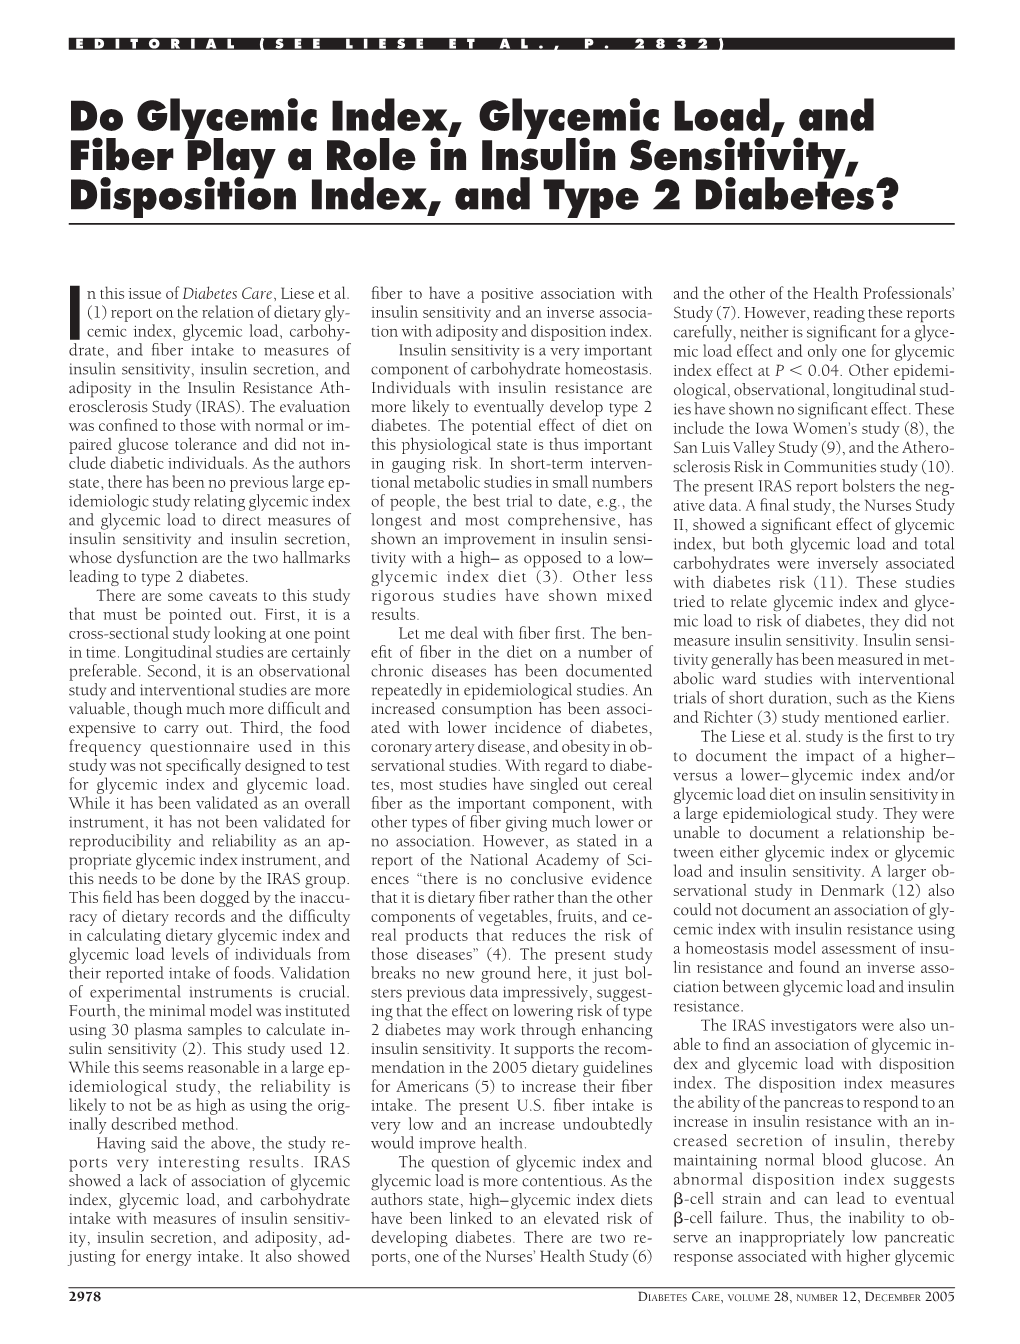 Do Glycemic Index, Glycemic Load, and Fiber Play a Role in Insulin Sensitivity, Disposition Index, and Type 2 Diabetes?